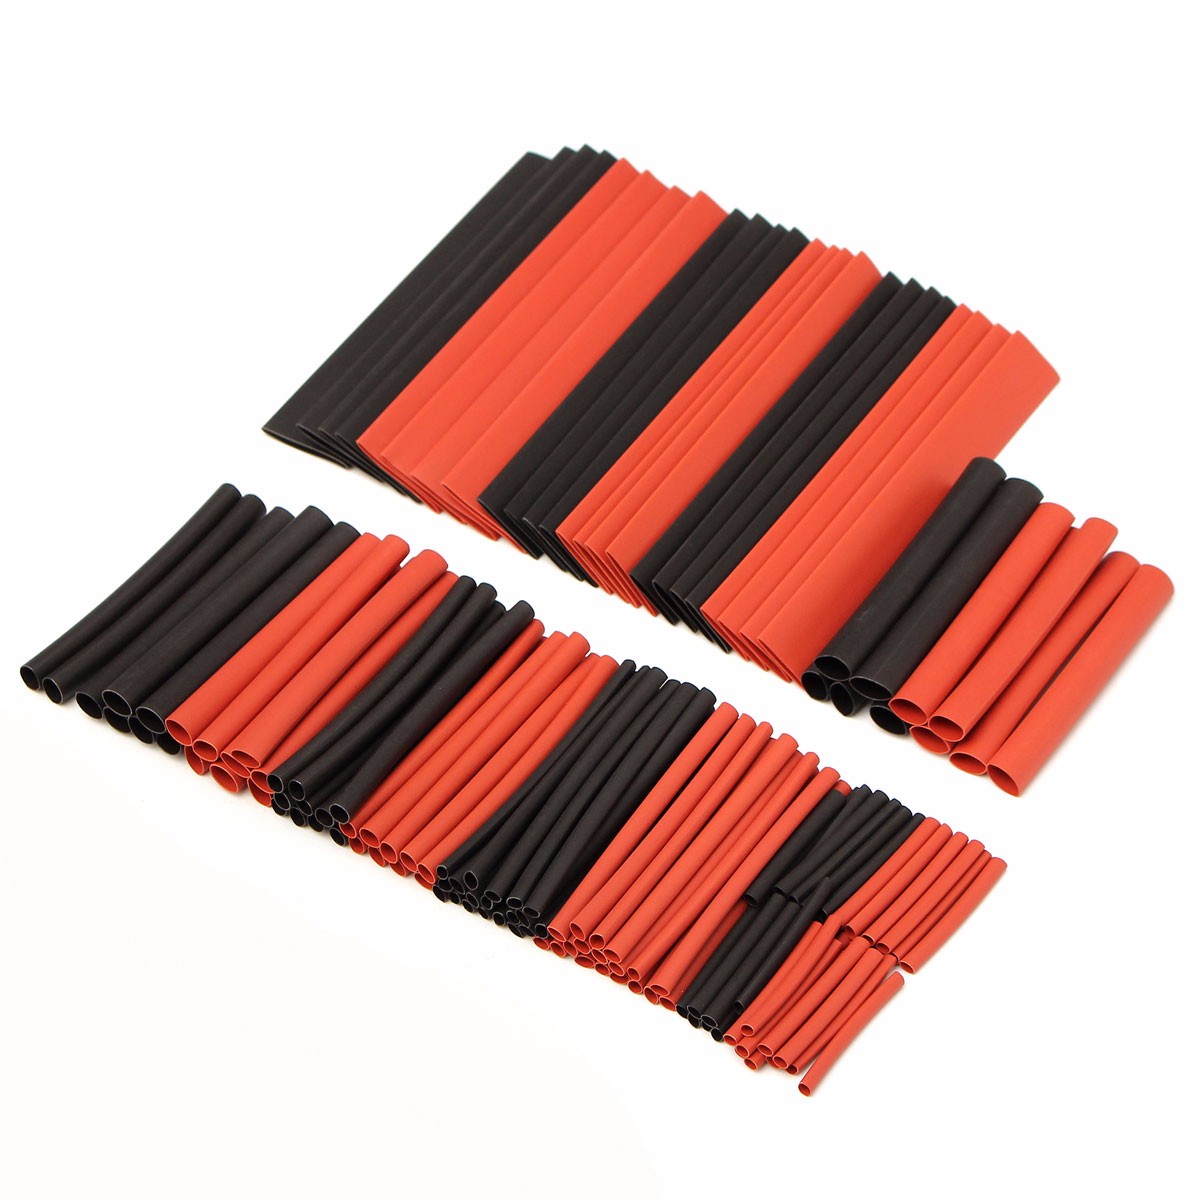 150-PCS-Halogen-Free-21-Heat-Shrink-Tubing-Wire-Cable-Sleeving-Wrap-Wire-Set-1057899-2